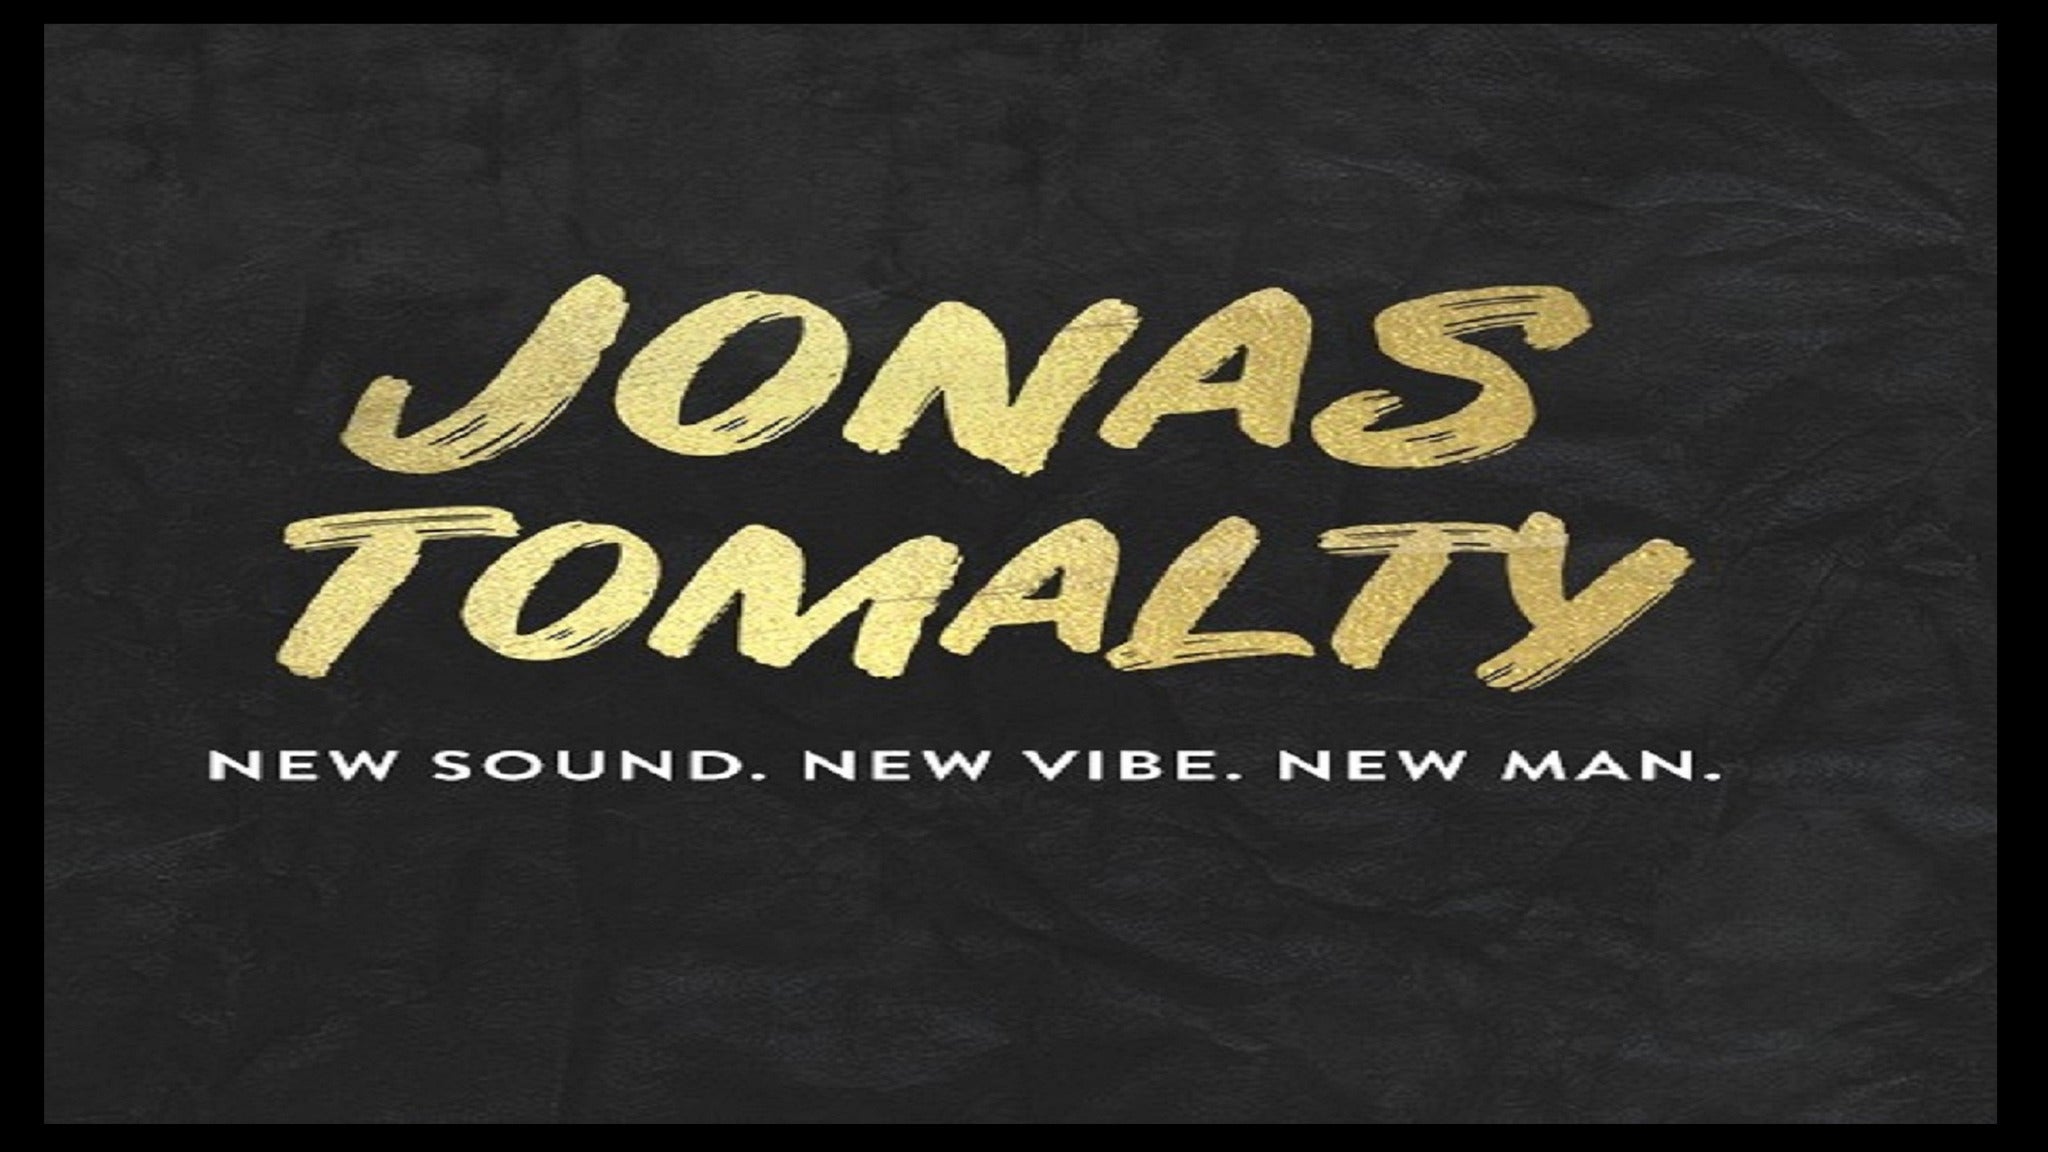 Image used with permission from Ticketmaster | Jonas tickets